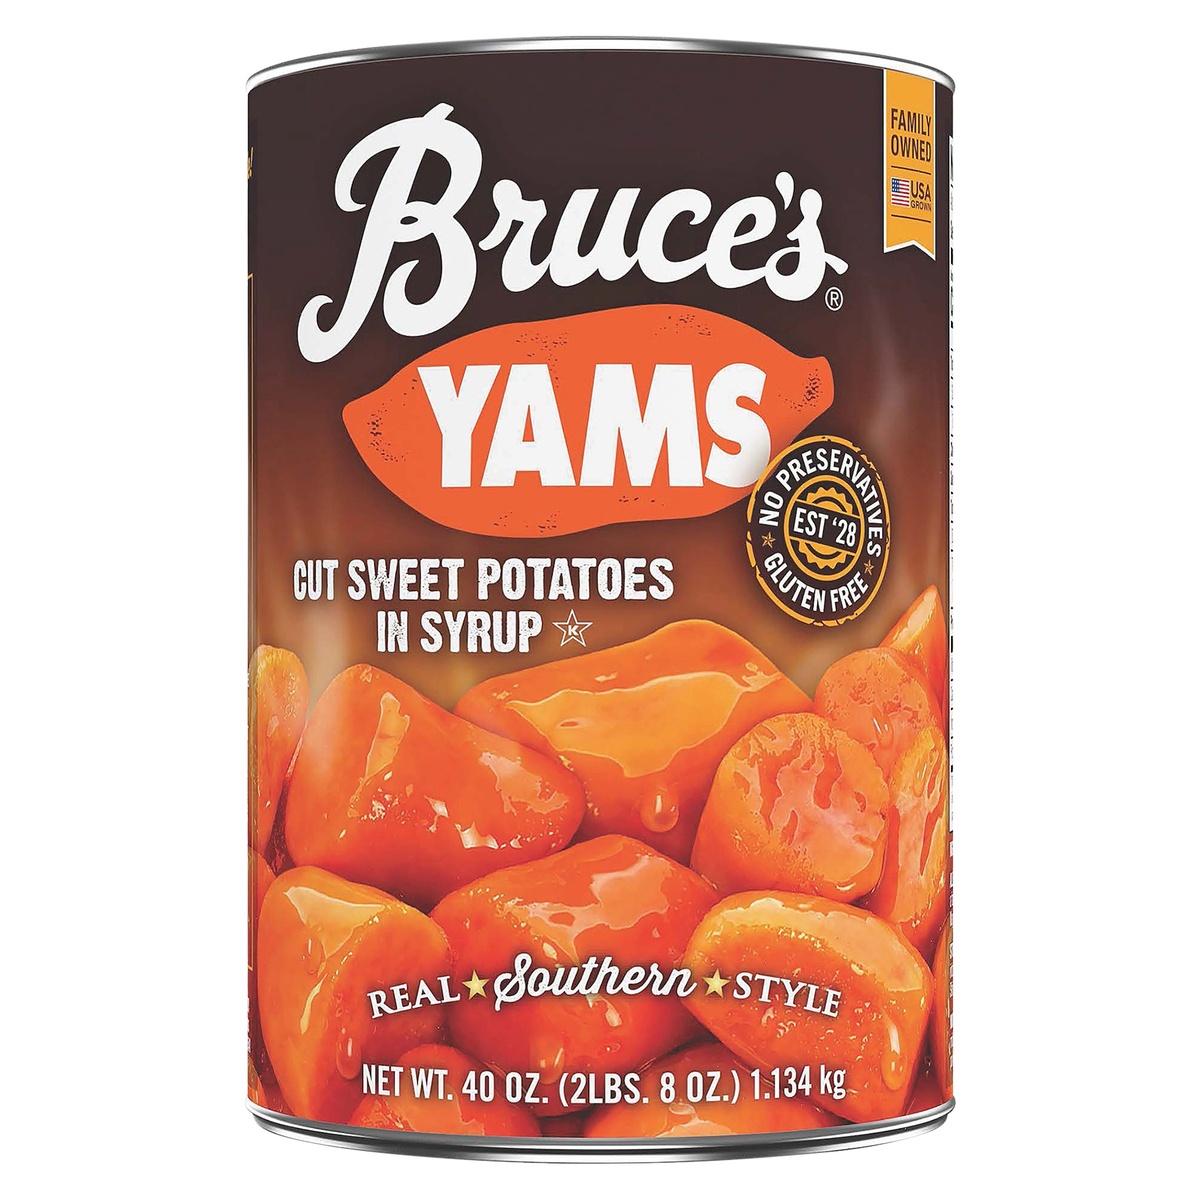 slide 1 of 4, Bruce's Yams Cut Sweet Potatoes in Syrup, 40 oz